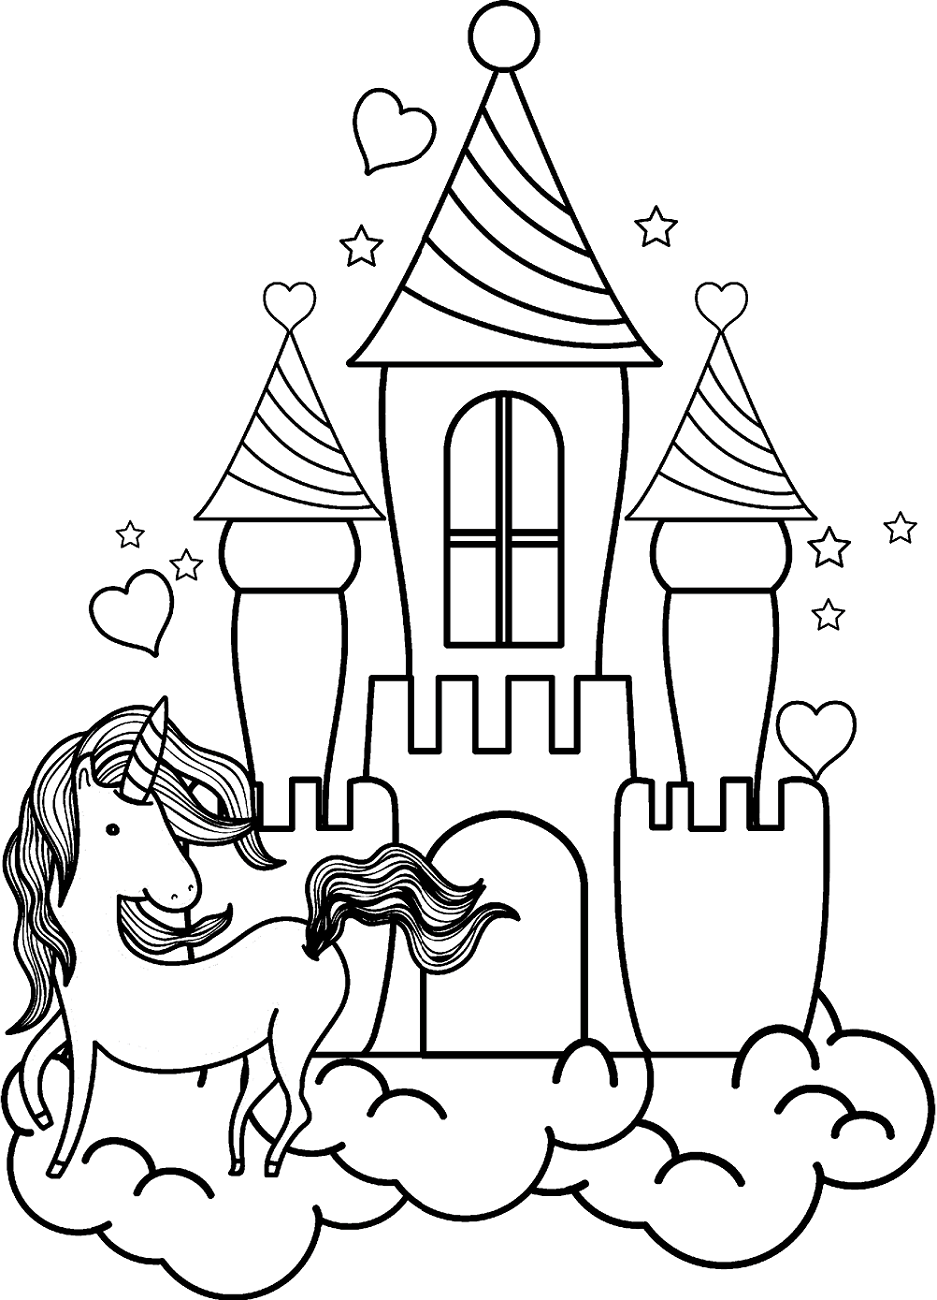 Unicorn And The Castle Coloring Page Free Printable Coloring Pages For Kids